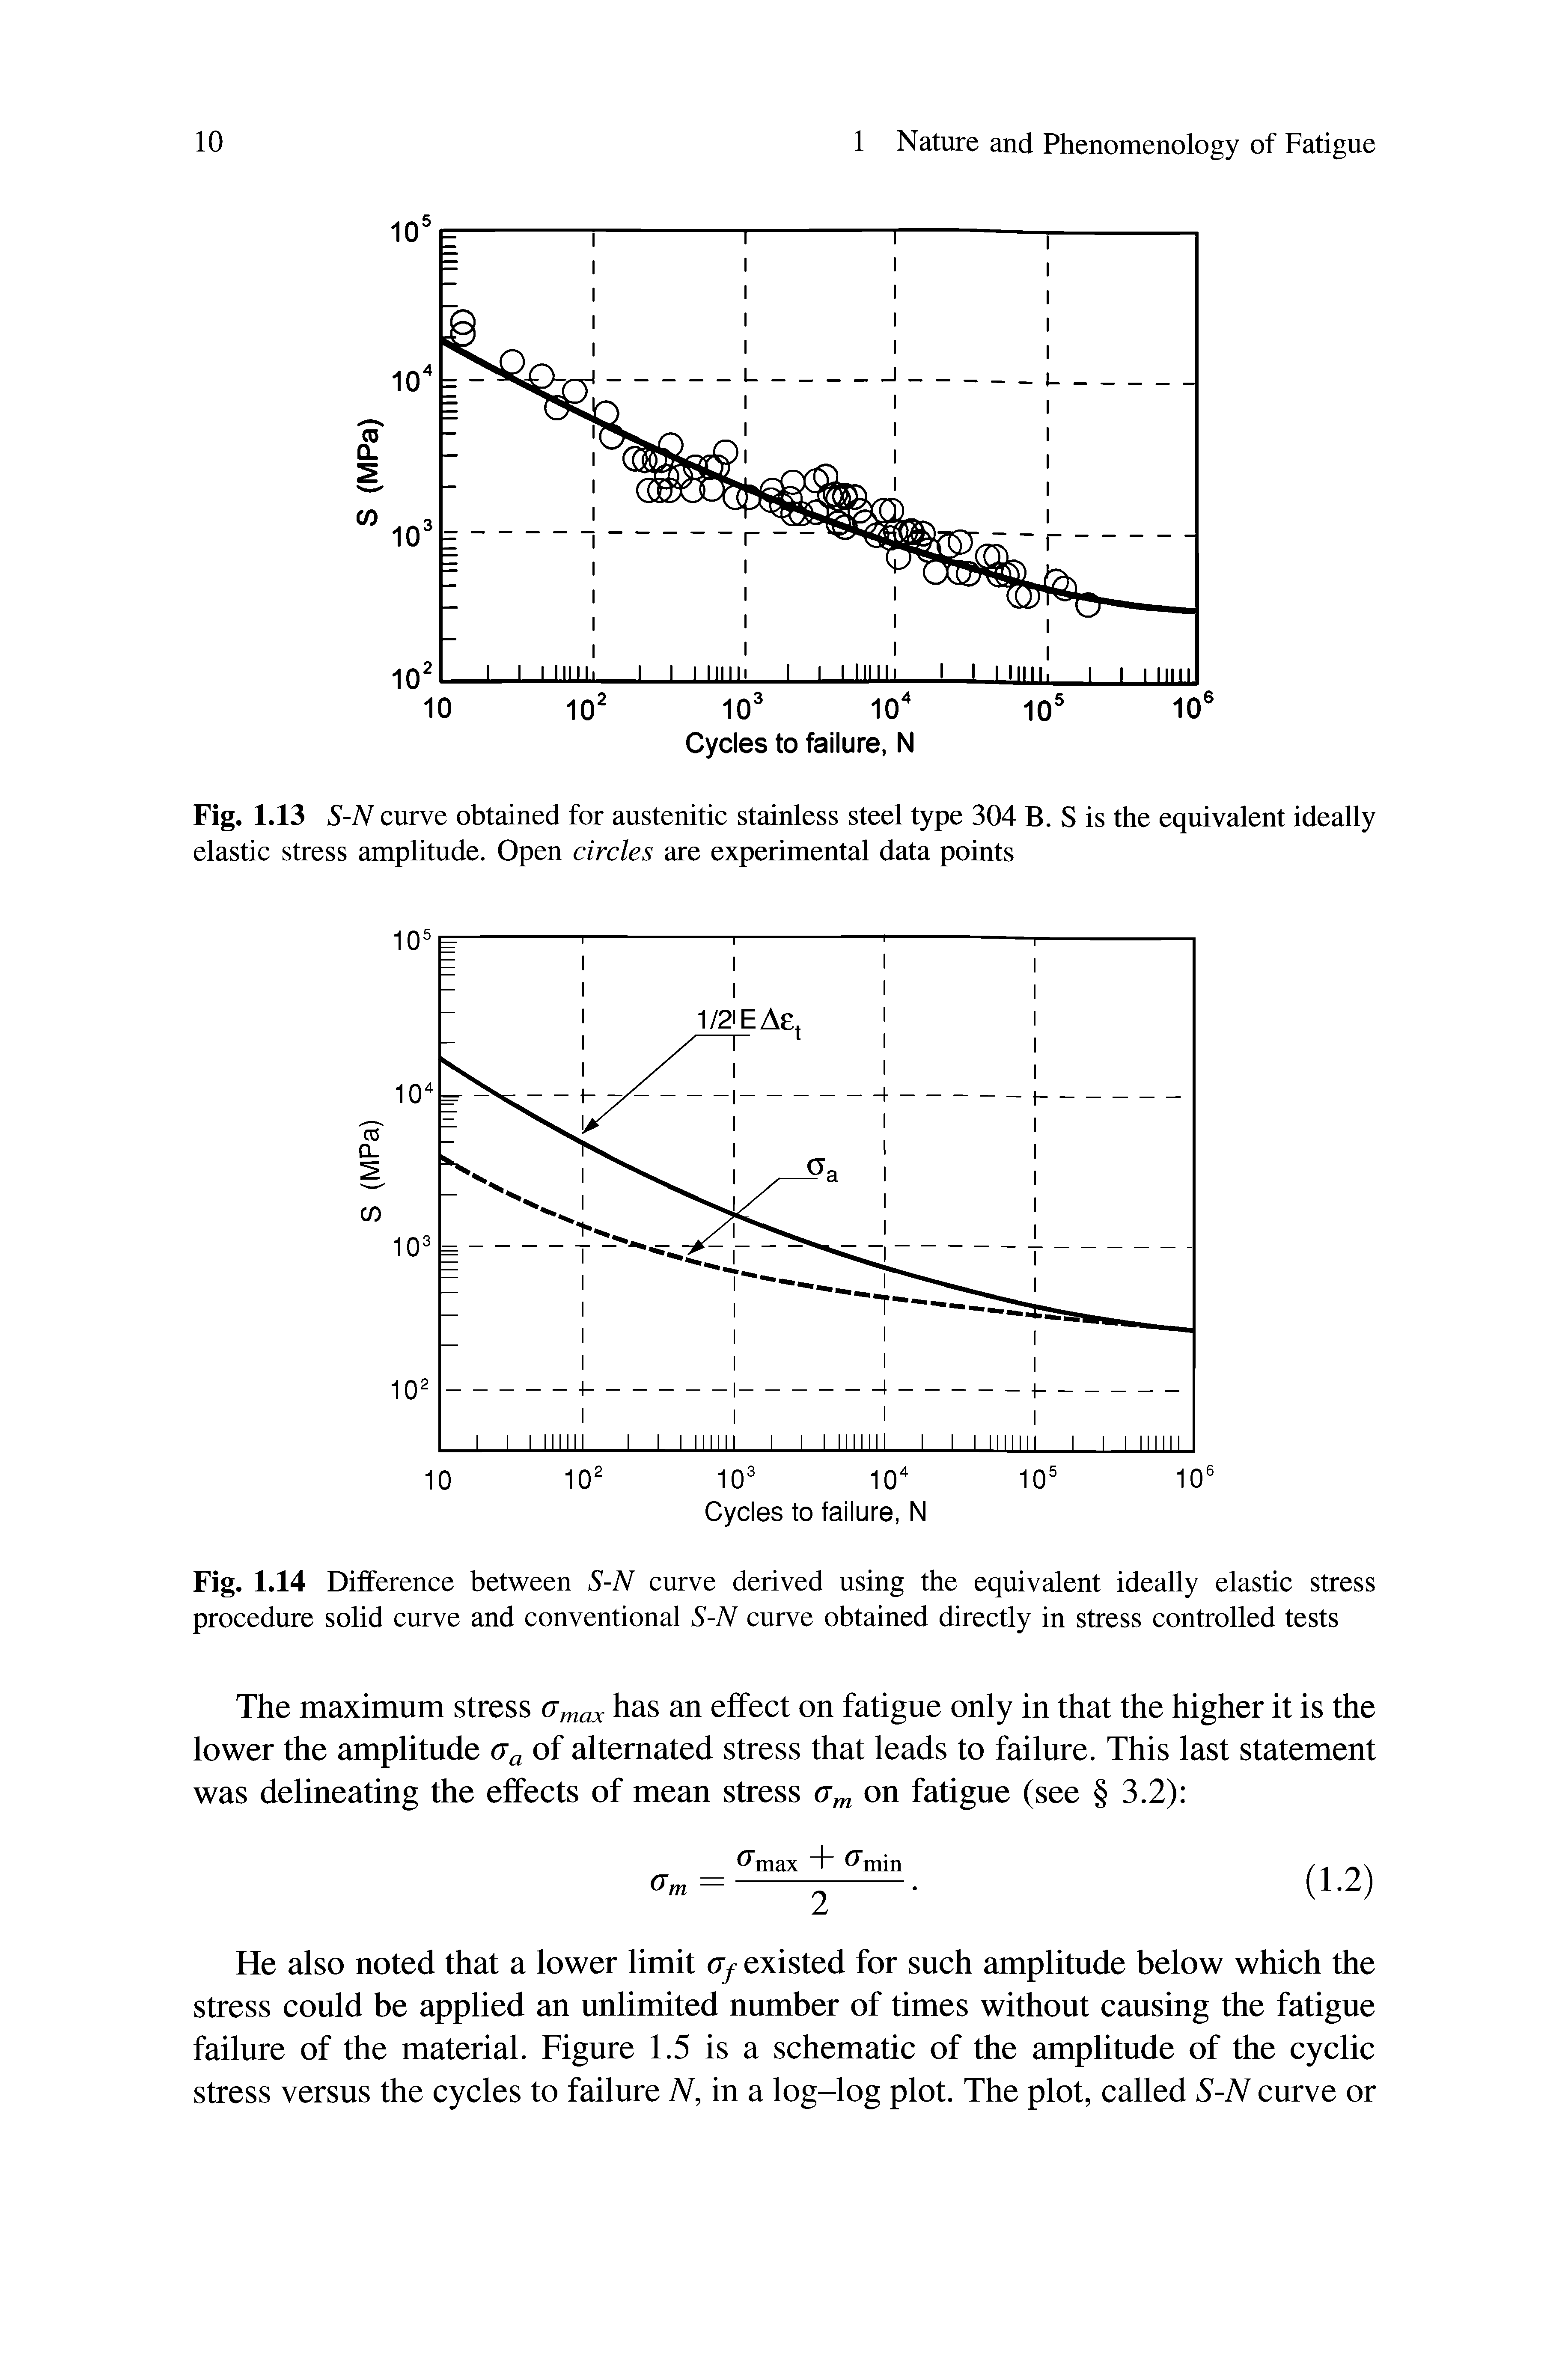 Fig. 1.14 Difference between S-N curve derived using the equivalent ideally elastic stress procedure solid curve and conventional S-N curve obtained directly in stress controlled tests...